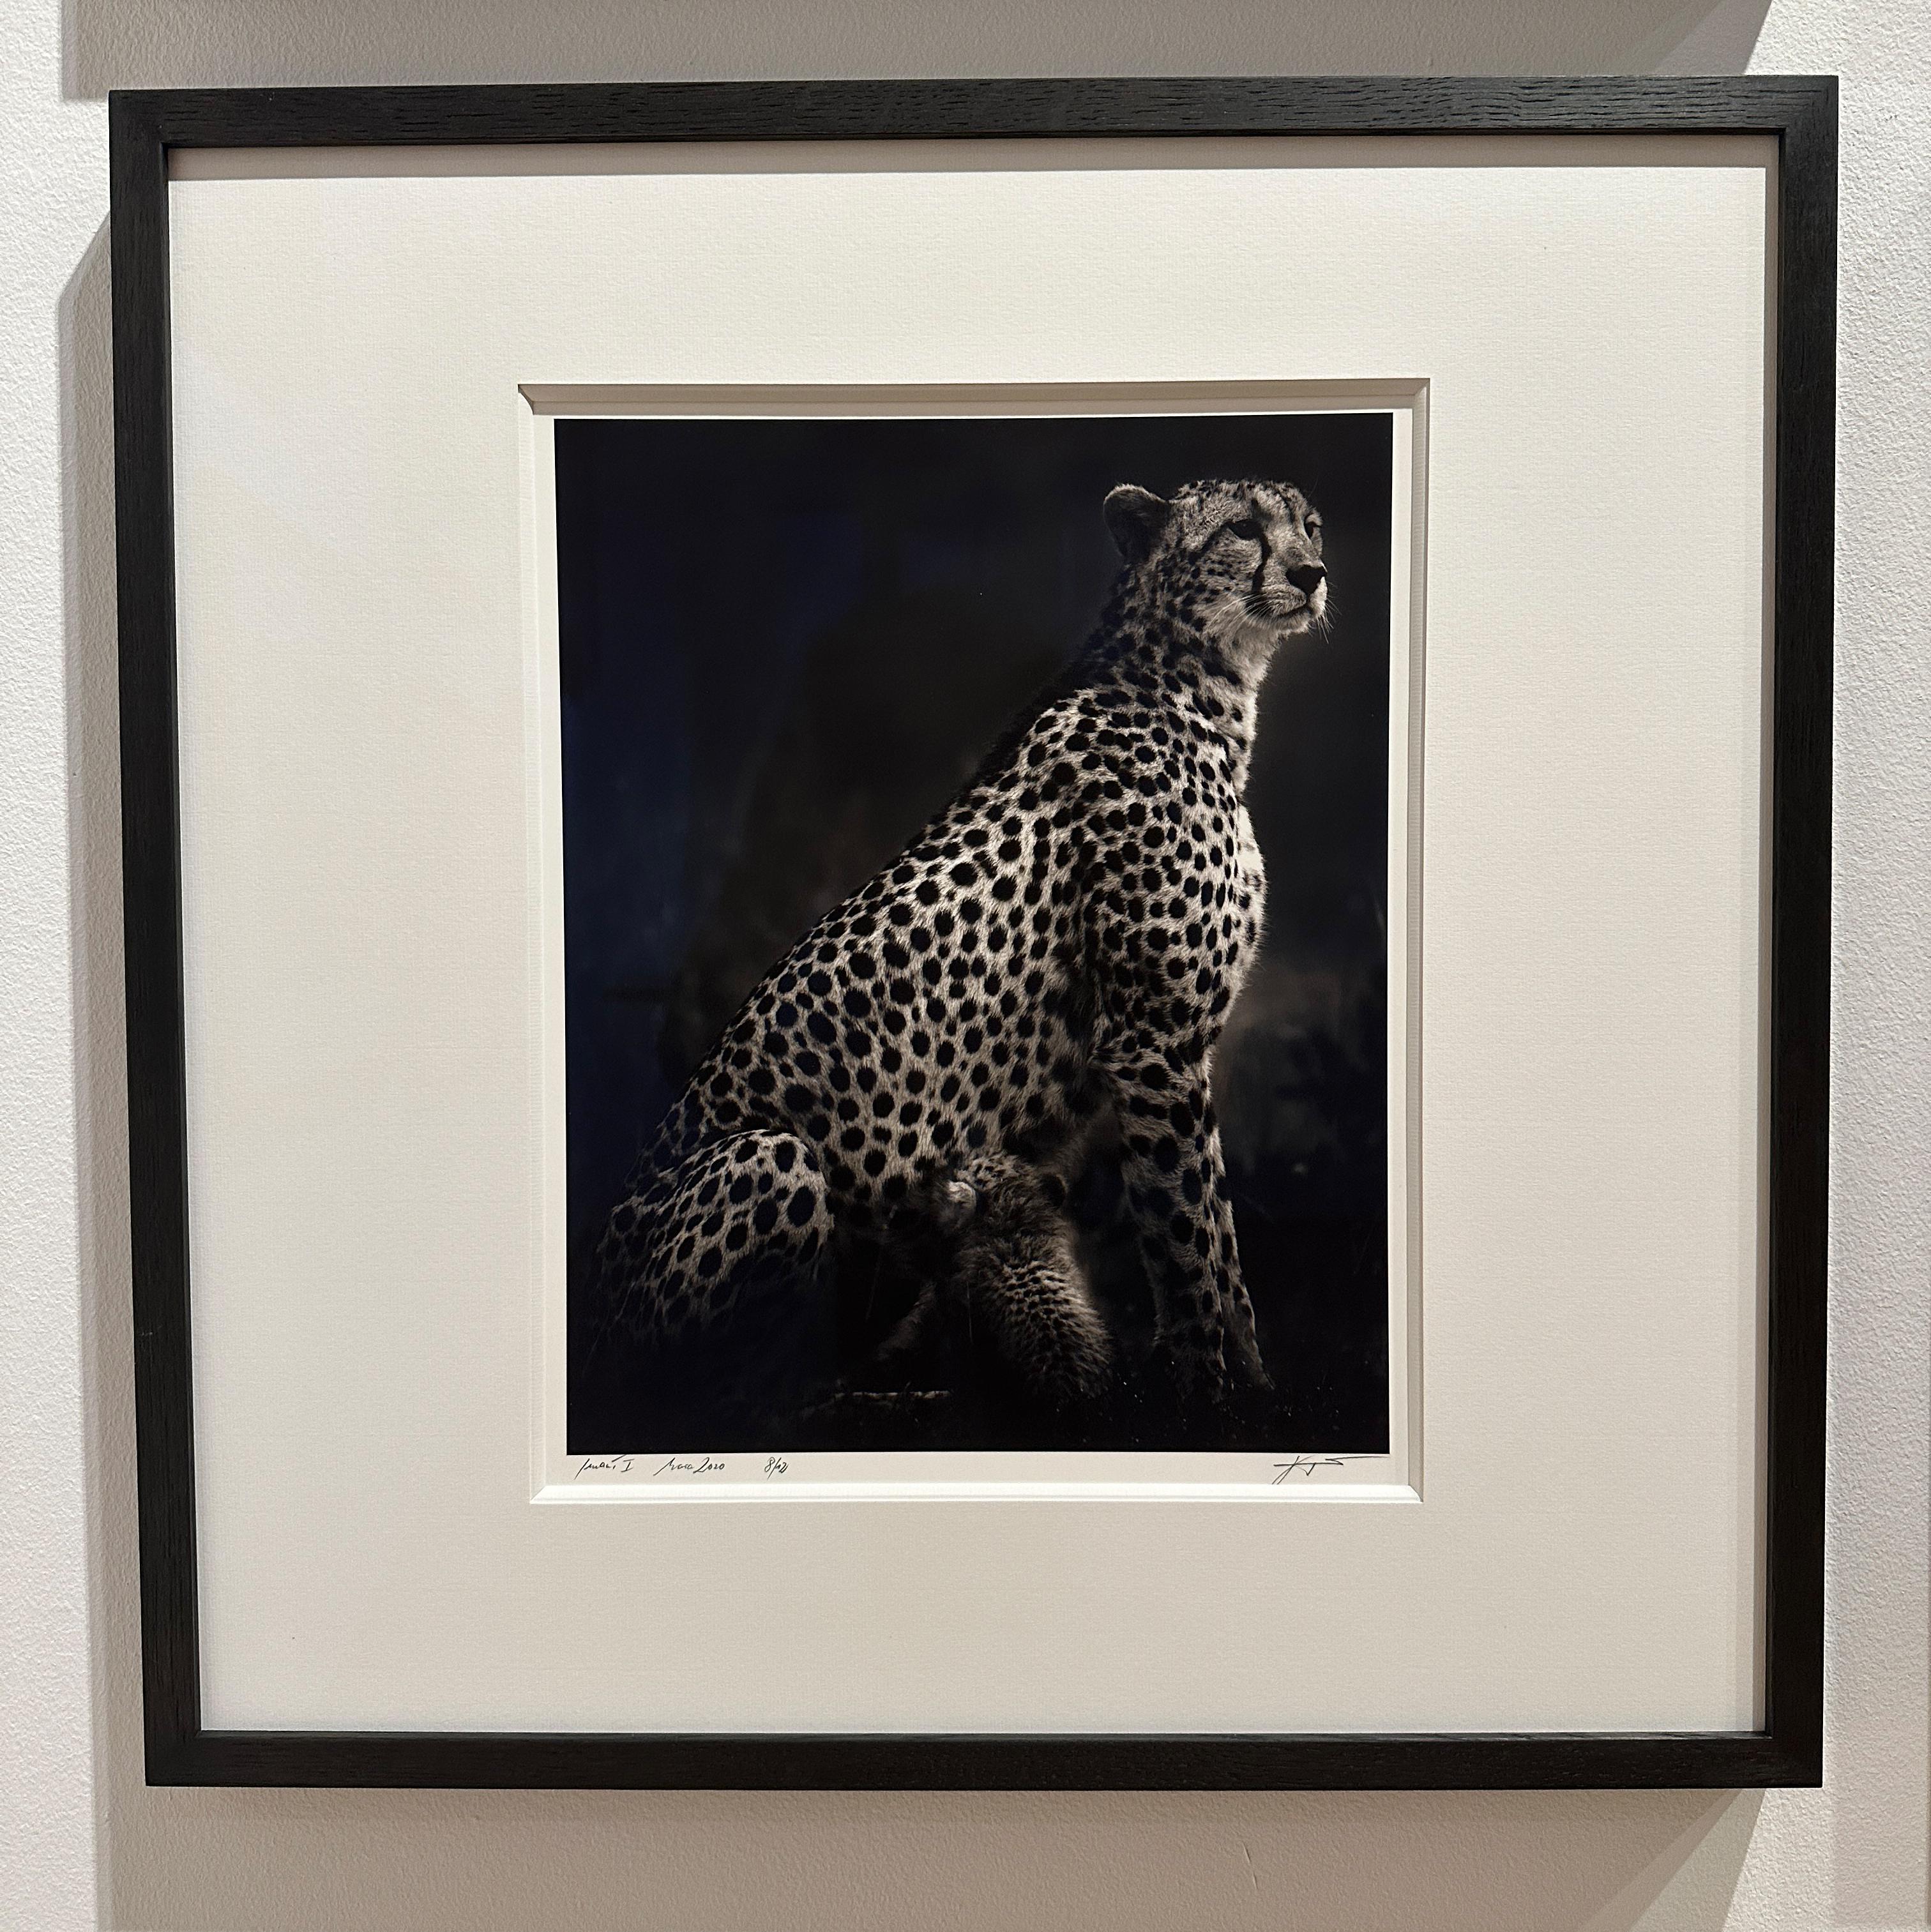 Imani I, animal, black and white photography, cheetah, Africa, wildlife - Photograph by Joachim Schmeisser